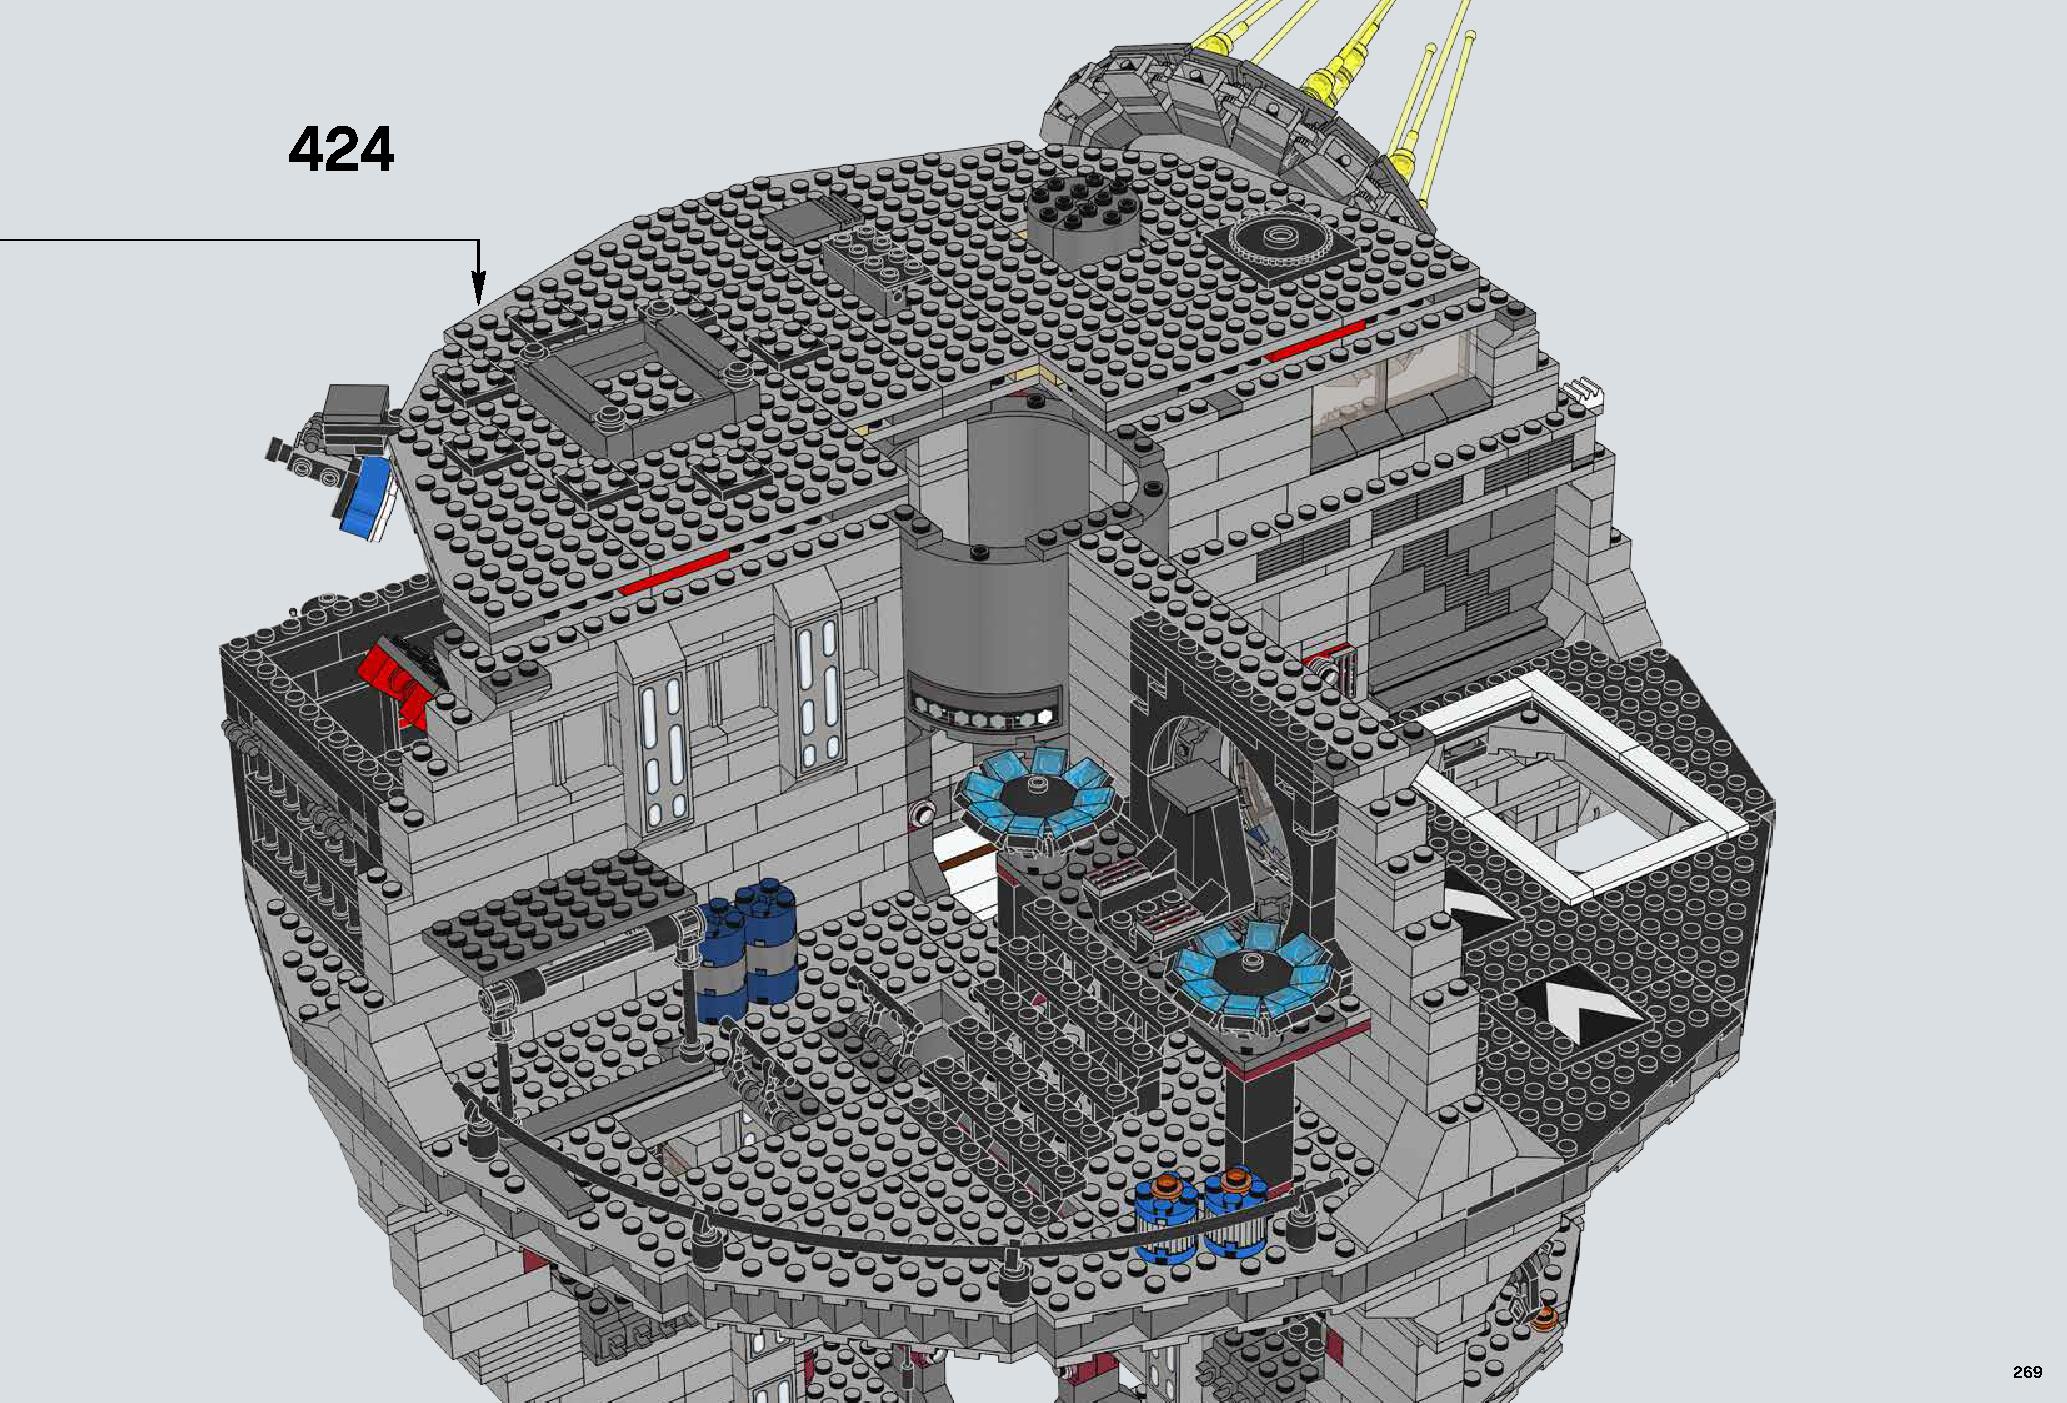 Death Star 75159 LEGO information LEGO instructions 269 page